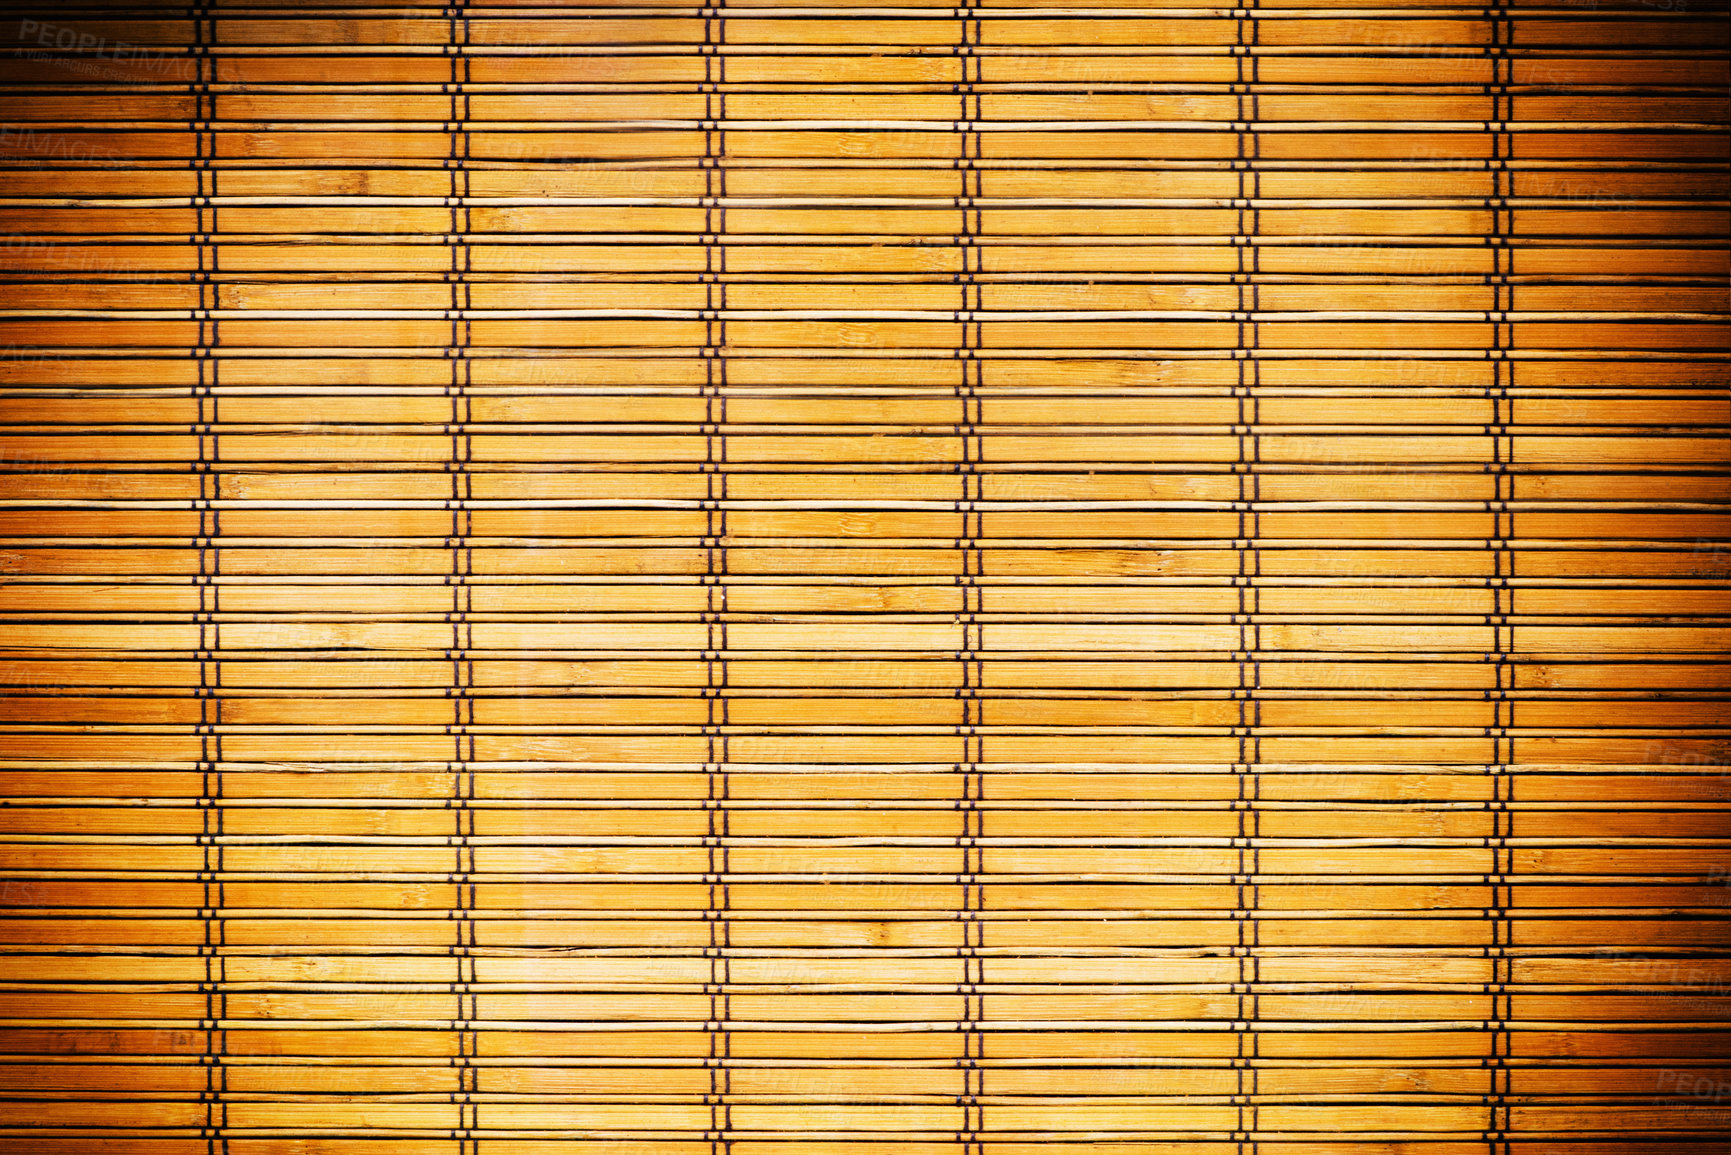 Buy stock photo Wallpaper, bamboo and texture with wooden blinds for shade, cover or pattern of abstract wall, design or color background. Detail of wood surface, stripes and lines with exterior or modern curtains